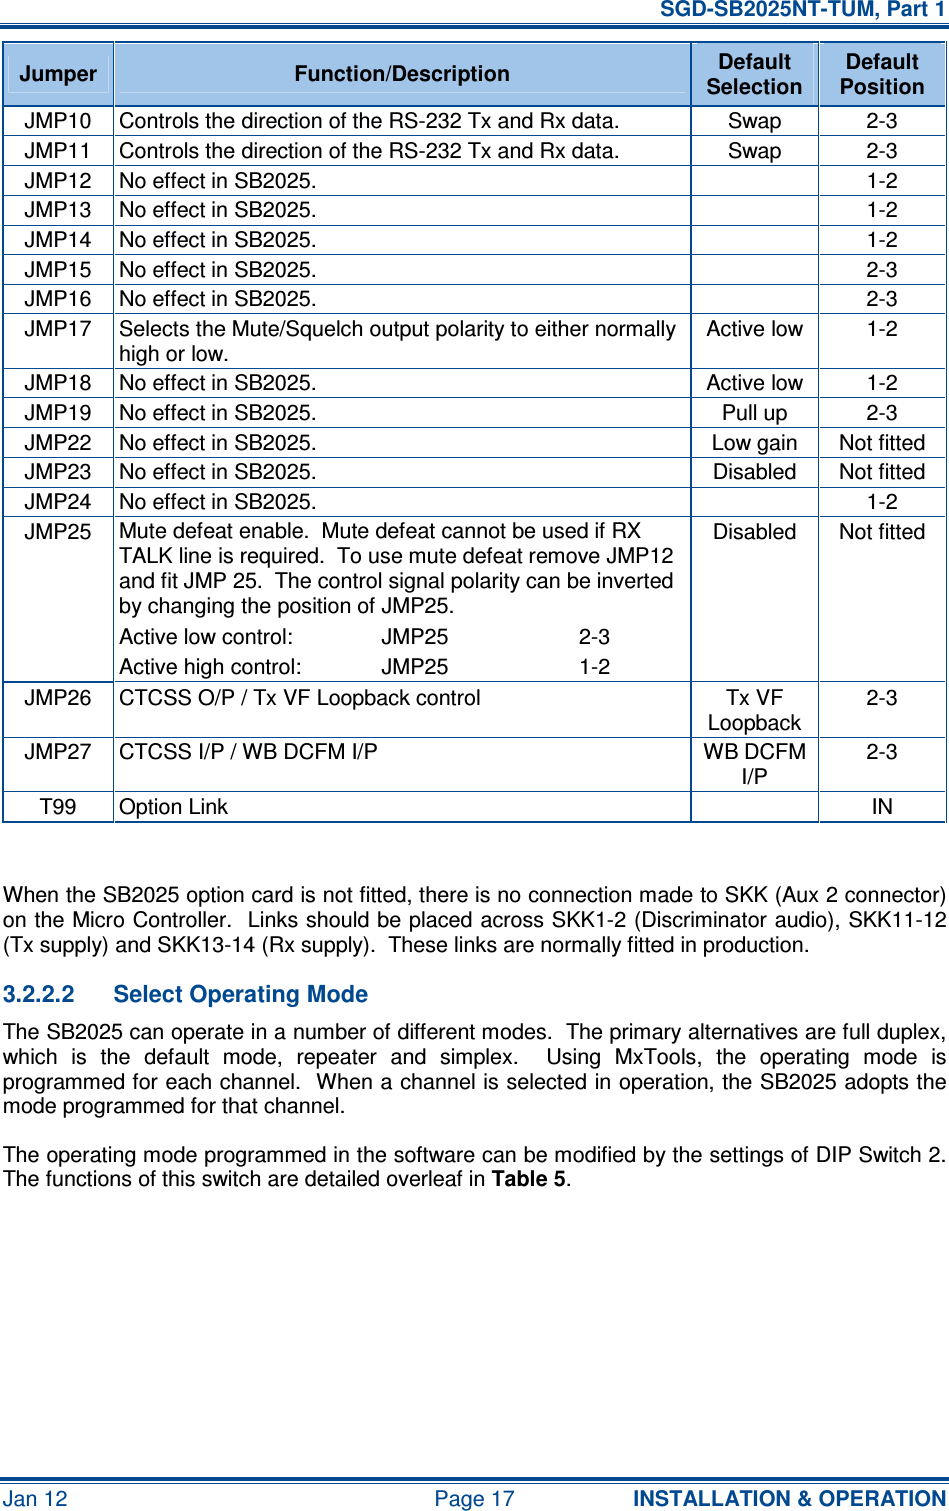   SGD-SB2025NT-TUM, Part 1 Jan 12  Page 17  INSTALLATION &amp; OPERATION Jumper  Function/Description  Default Selection Default Position JMP10  Controls the direction of the RS-232 Tx and Rx data.  Swap  2-3 JMP11  Controls the direction of the RS-232 Tx and Rx data.  Swap  2-3 JMP12  No effect in SB2025.    1-2 JMP13  No effect in SB2025.    1-2 JMP14  No effect in SB2025.    1-2 JMP15  No effect in SB2025.    2-3 JMP16  No effect in SB2025.    2-3 JMP17  Selects the Mute/Squelch output polarity to either normally high or low. Active low  1-2 JMP18  No effect in SB2025.  Active low  1-2 JMP19  No effect in SB2025.  Pull up  2-3 JMP22  No effect in SB2025.  Low gain  Not fitted JMP23  No effect in SB2025.  Disabled  Not fitted JMP24  No effect in SB2025.    1-2 Mute defeat enable.  Mute defeat cannot be used if RX TALK line is required.  To use mute defeat remove JMP12 and fit JMP 25.  The control signal polarity can be inverted by changing the position of JMP25. Active low control:  JMP25  2-3 JMP25 Active high control:  JMP25  1-2 Disabled  Not fitted JMP26  CTCSS O/P / Tx VF Loopback control  Tx VF Loopback 2-3 JMP27  CTCSS I/P / WB DCFM I/P  WB DCFM I/P 2-3 T99  Option Link    IN  When the SB2025 option card is not fitted, there is no connection made to SKK (Aux 2 connector) on the Micro Controller.  Links should be placed across SKK1-2 (Discriminator audio), SKK11-12 (Tx supply) and SKK13-14 (Rx supply).  These links are normally fitted in production. 3.2.2.2  Select Operating Mode The SB2025 can operate in a number of different modes.  The primary alternatives are full duplex, which  is  the  default  mode,  repeater  and  simplex.    Using  MxTools,  the  operating  mode  is programmed for each channel.  When a channel is selected in operation, the SB2025 adopts the mode programmed for that channel. The operating mode programmed in the software can be modified by the settings of DIP Switch 2.  The functions of this switch are detailed overleaf in Table 5.  